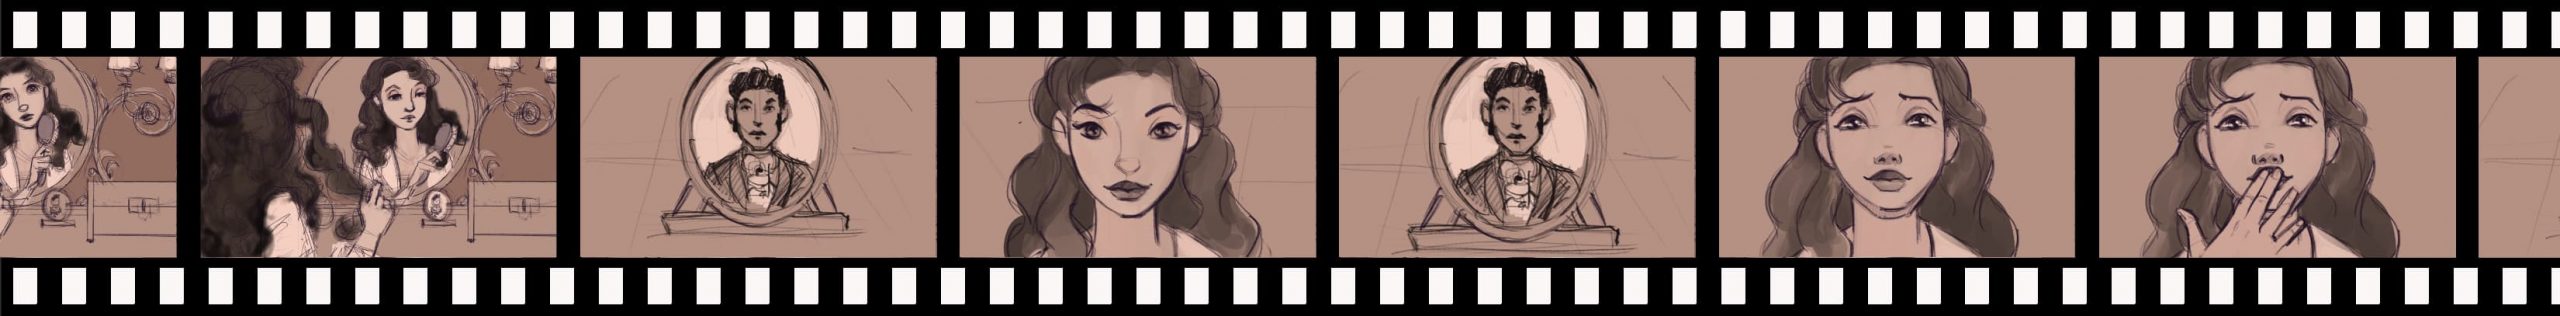 Phantom of the Opera — The Mirror Sequence storyboard presented as a filmstrip.